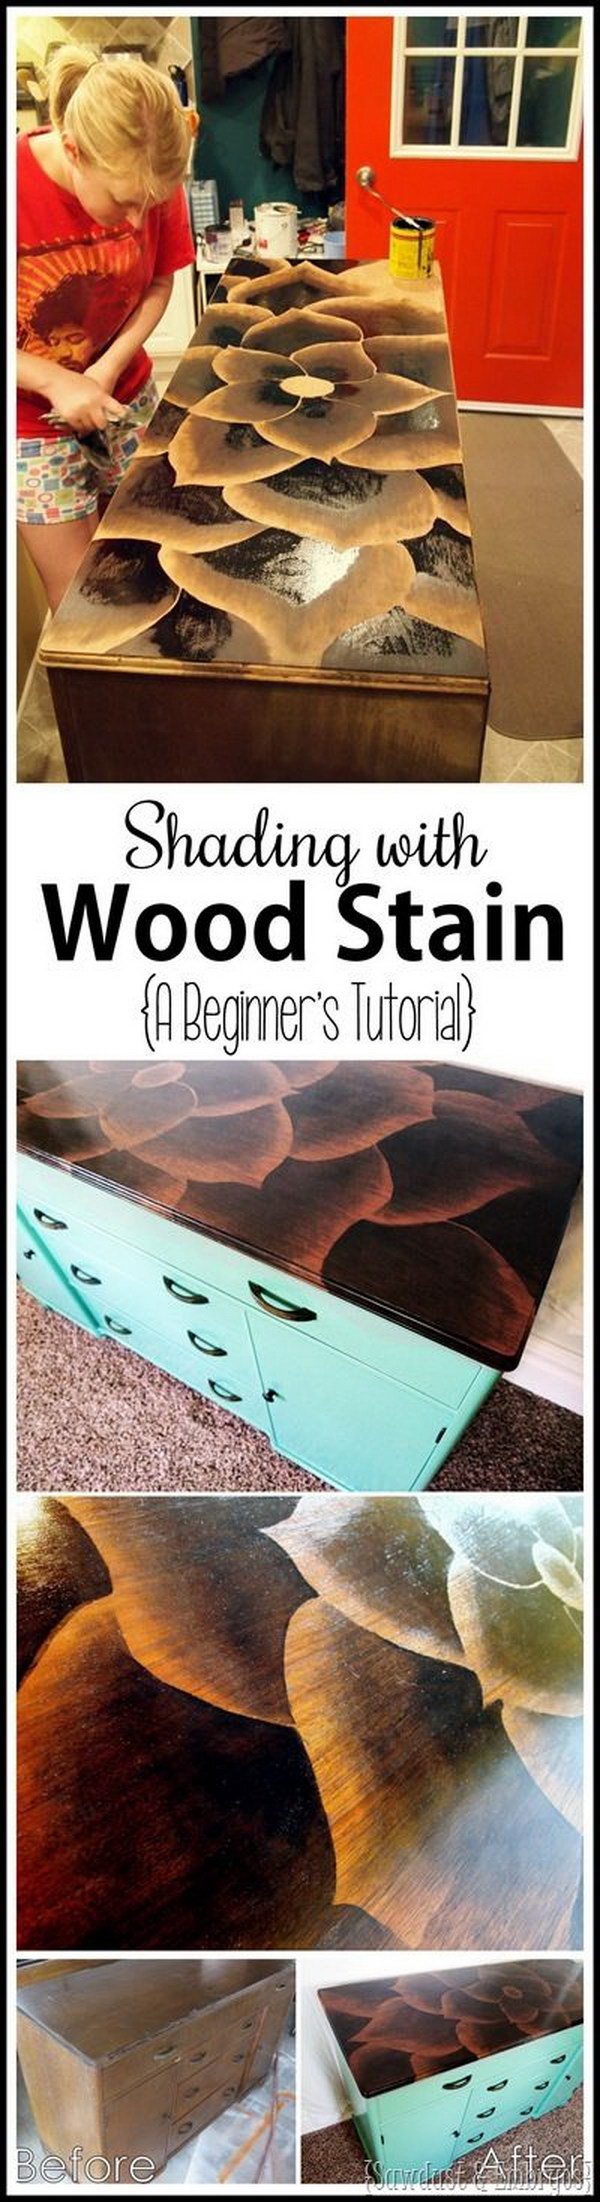 Using Stain To Make Artwork on Furniture. 